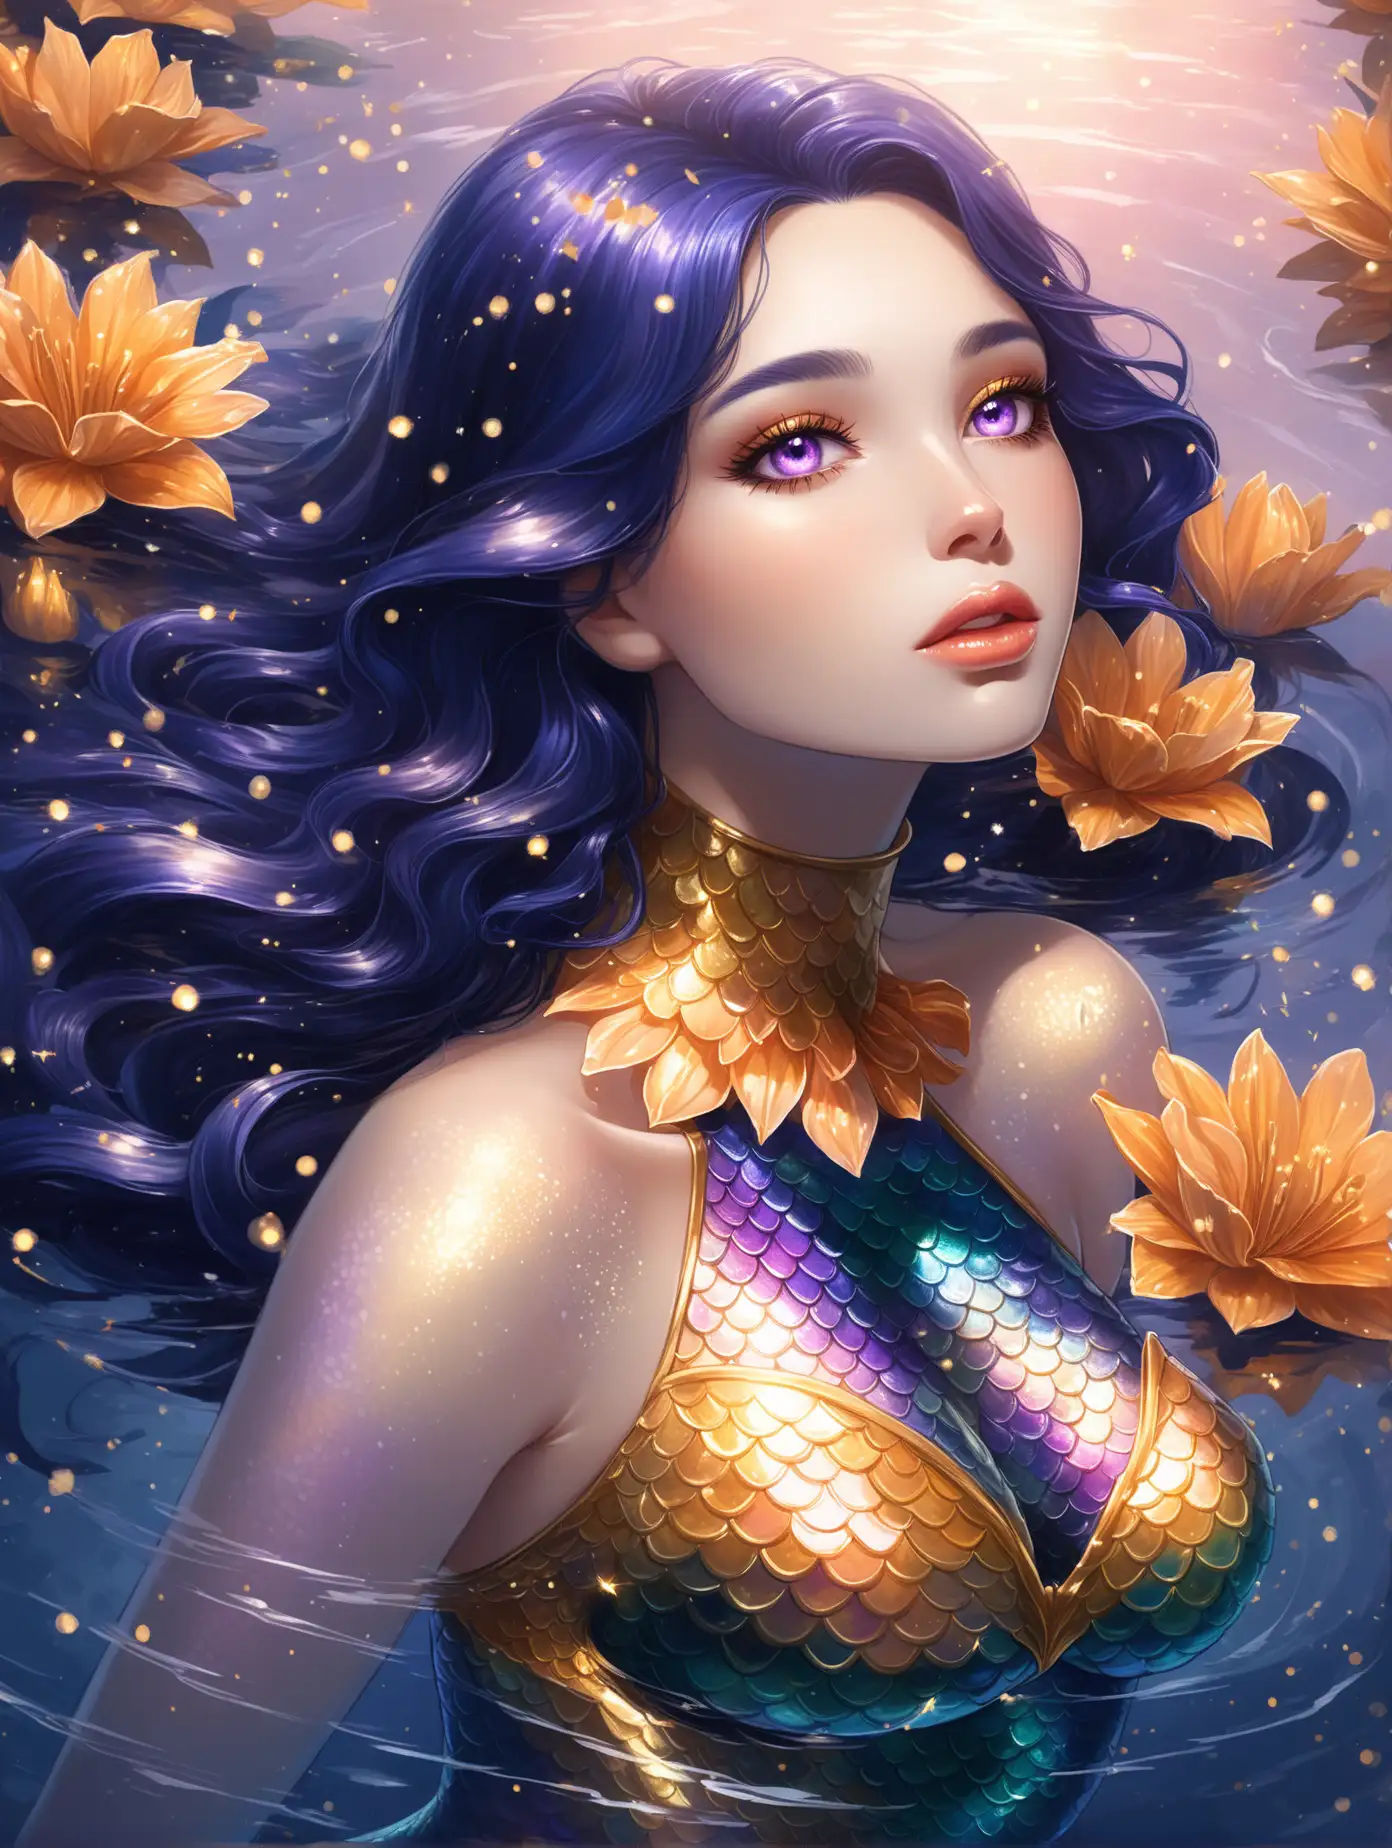 Enchanting Mermaid in Navy and Gold Iridescent Outfit Amidst Garden with Pink Fog and Gold Sparks